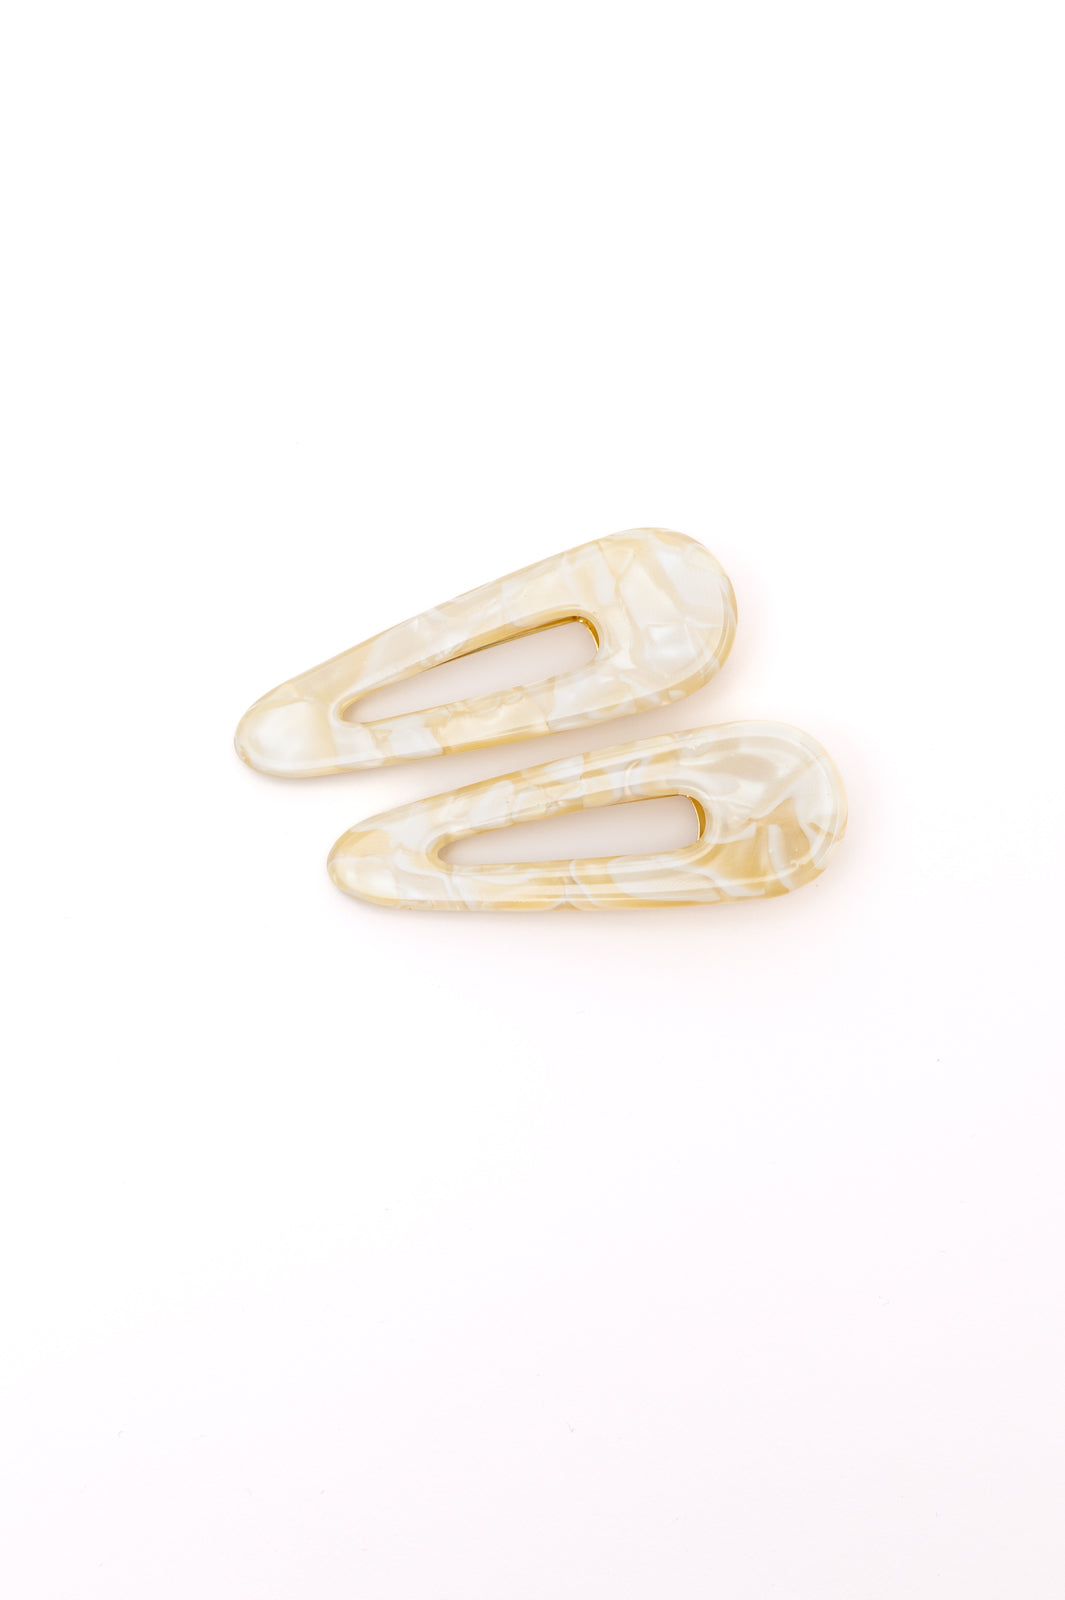 2 Pack Teardrop Hair Clip in Gold Shell - WEBSITE EXCLUSIVE